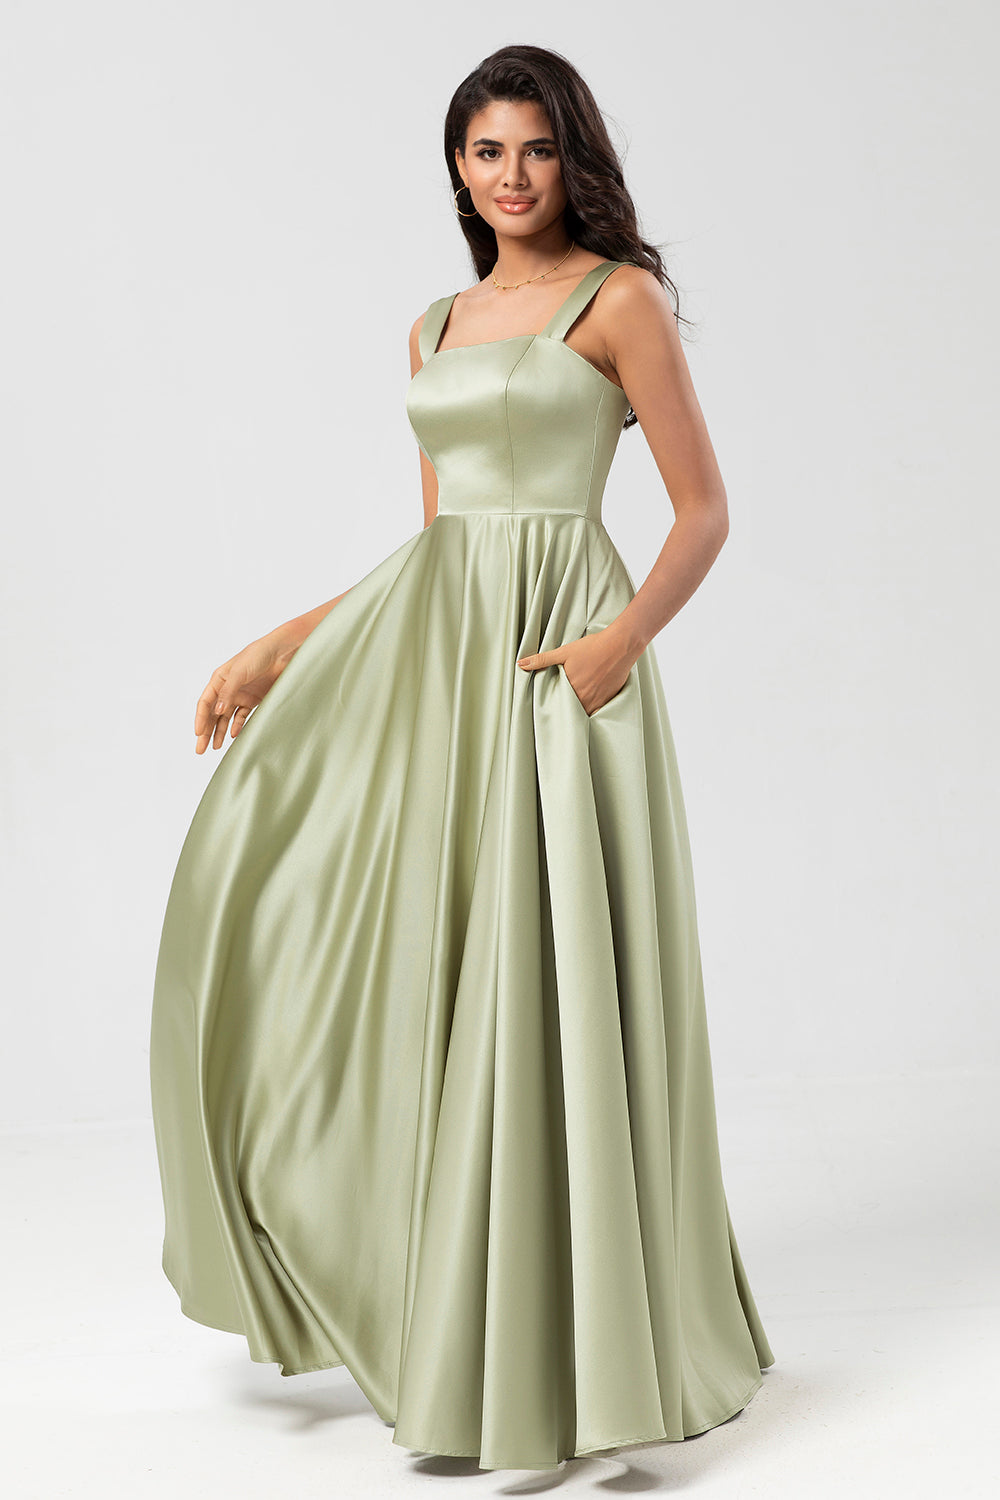 Dusty Sage A-Line Square Neck Floor-Length Satin Bridesmaid Dress with Pocket